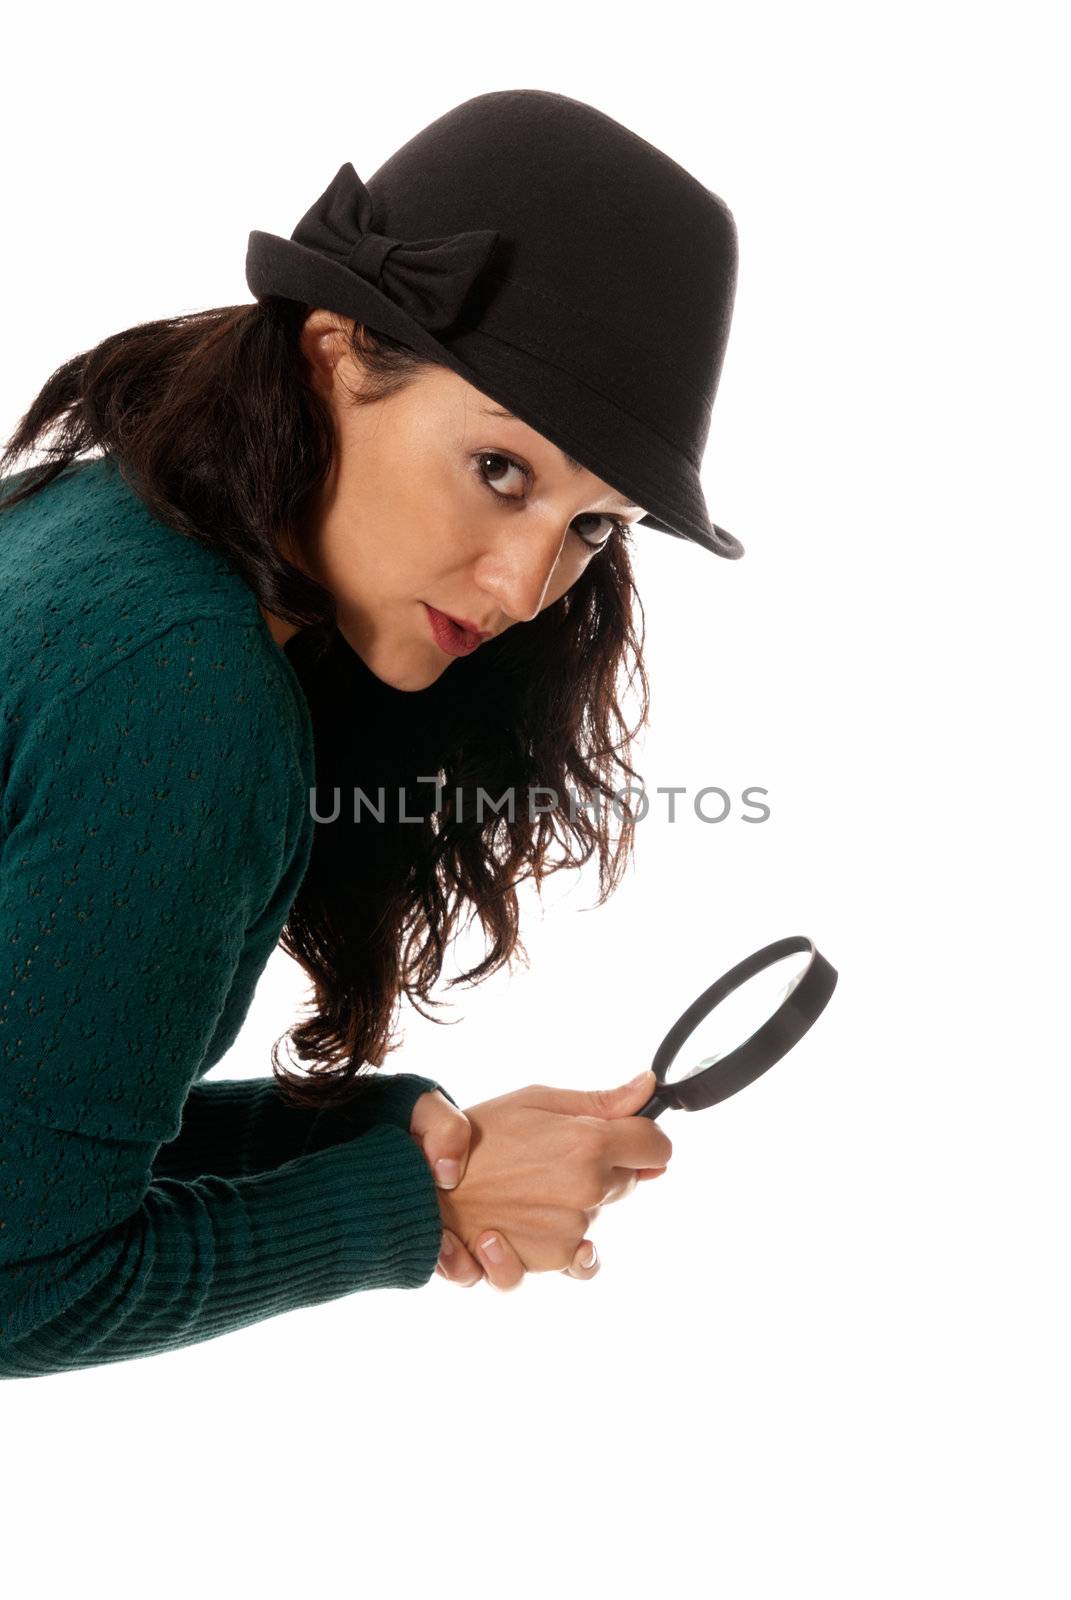 young woman with magnifier glass and hat looking to camera isolated on white background